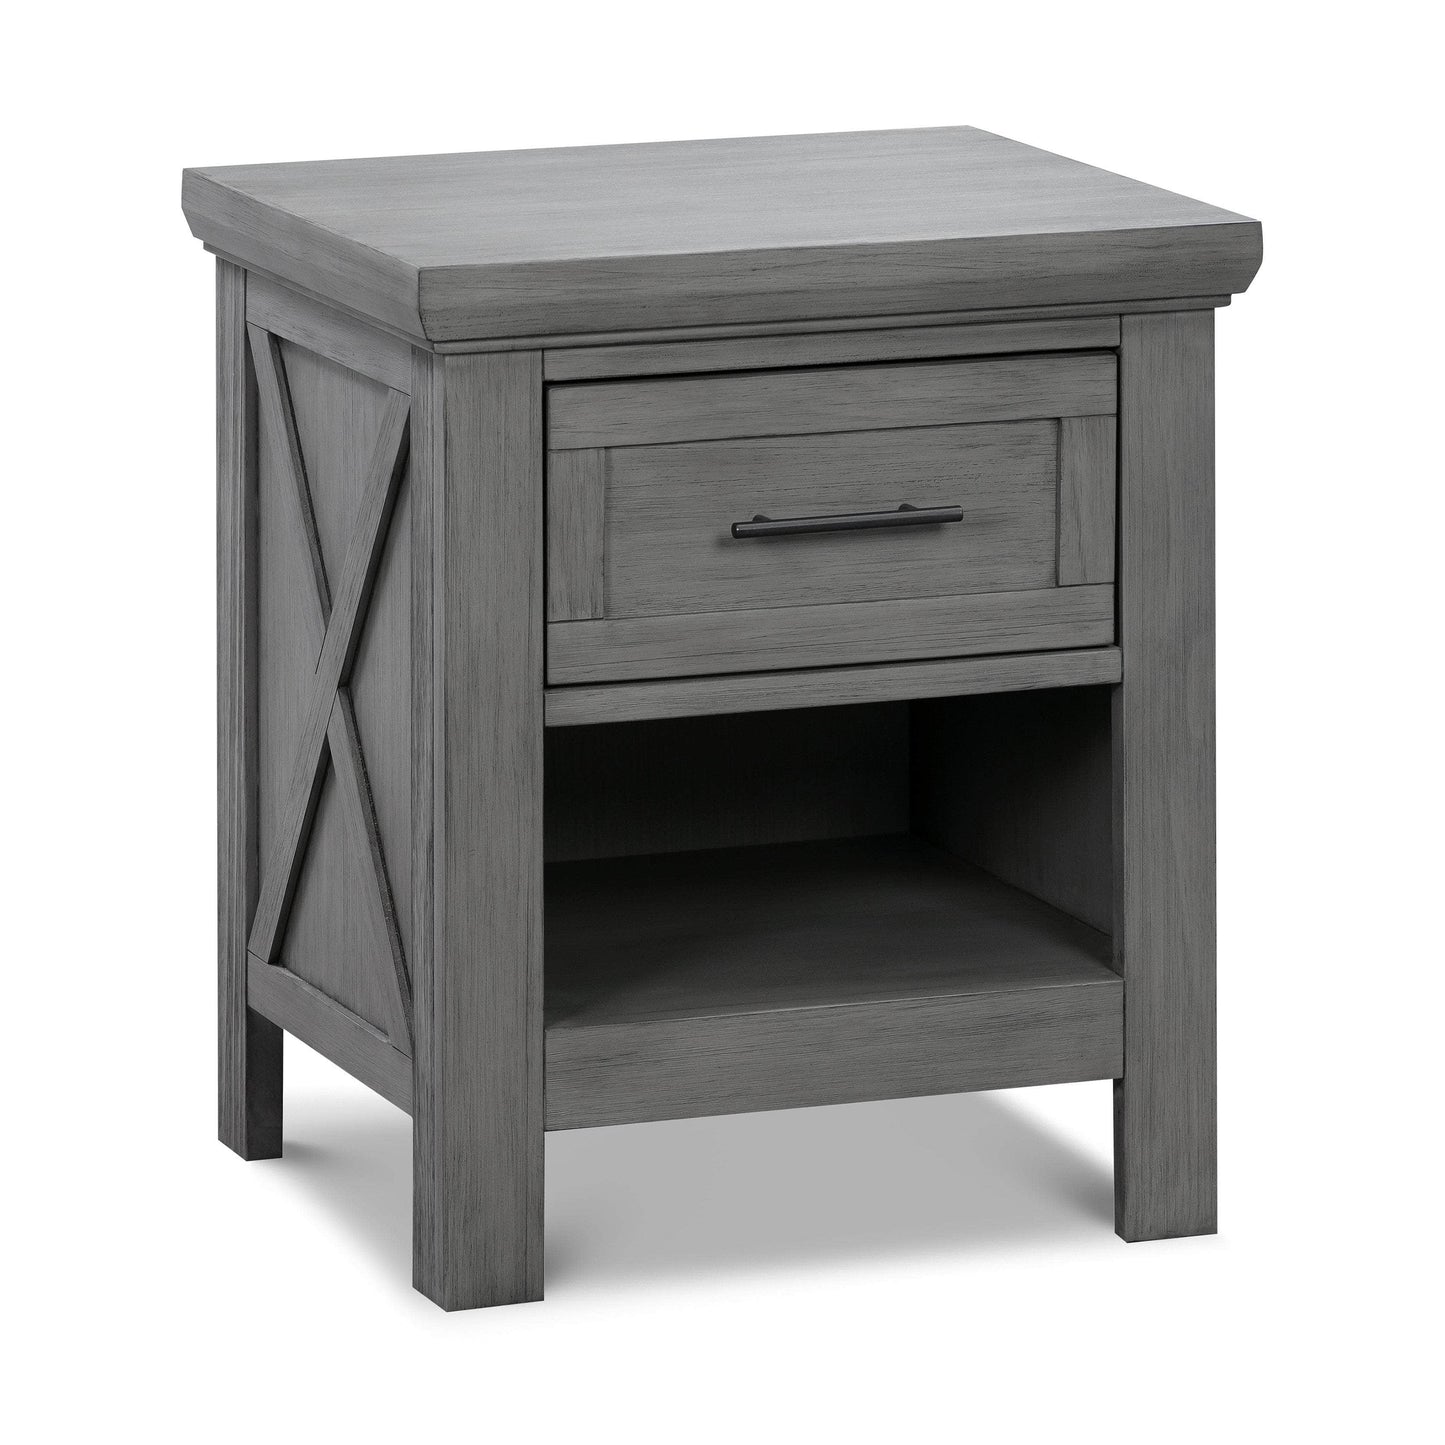 B14560WC,Emory Farmhouse Nightstand in Weathered Charcoal